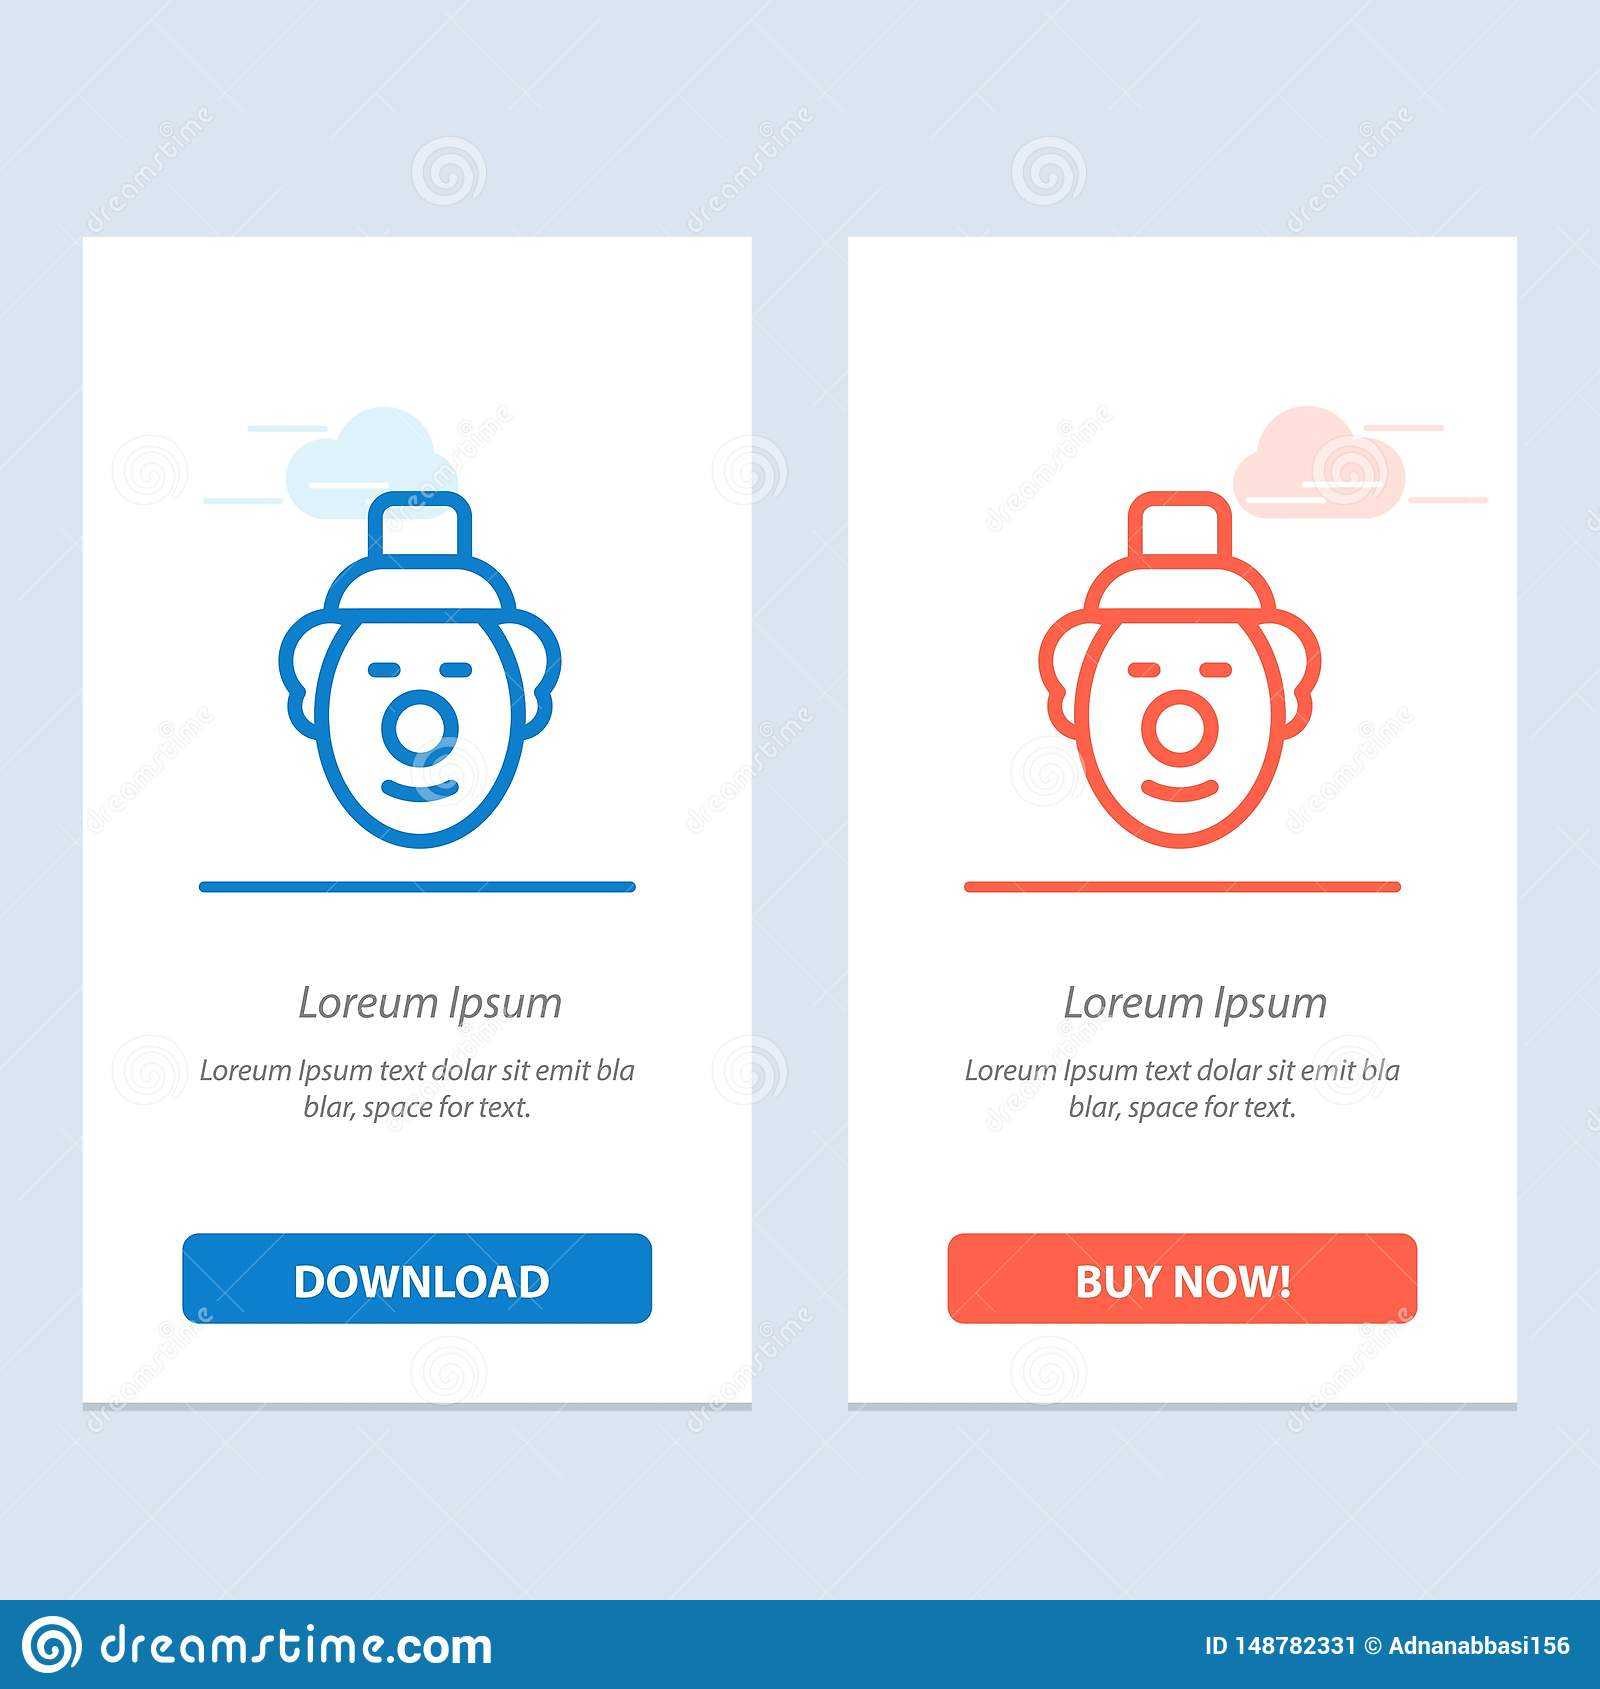 Joker, Clown, Circus Blue And Red Download And Buy Now Web Inside Joker Card Template